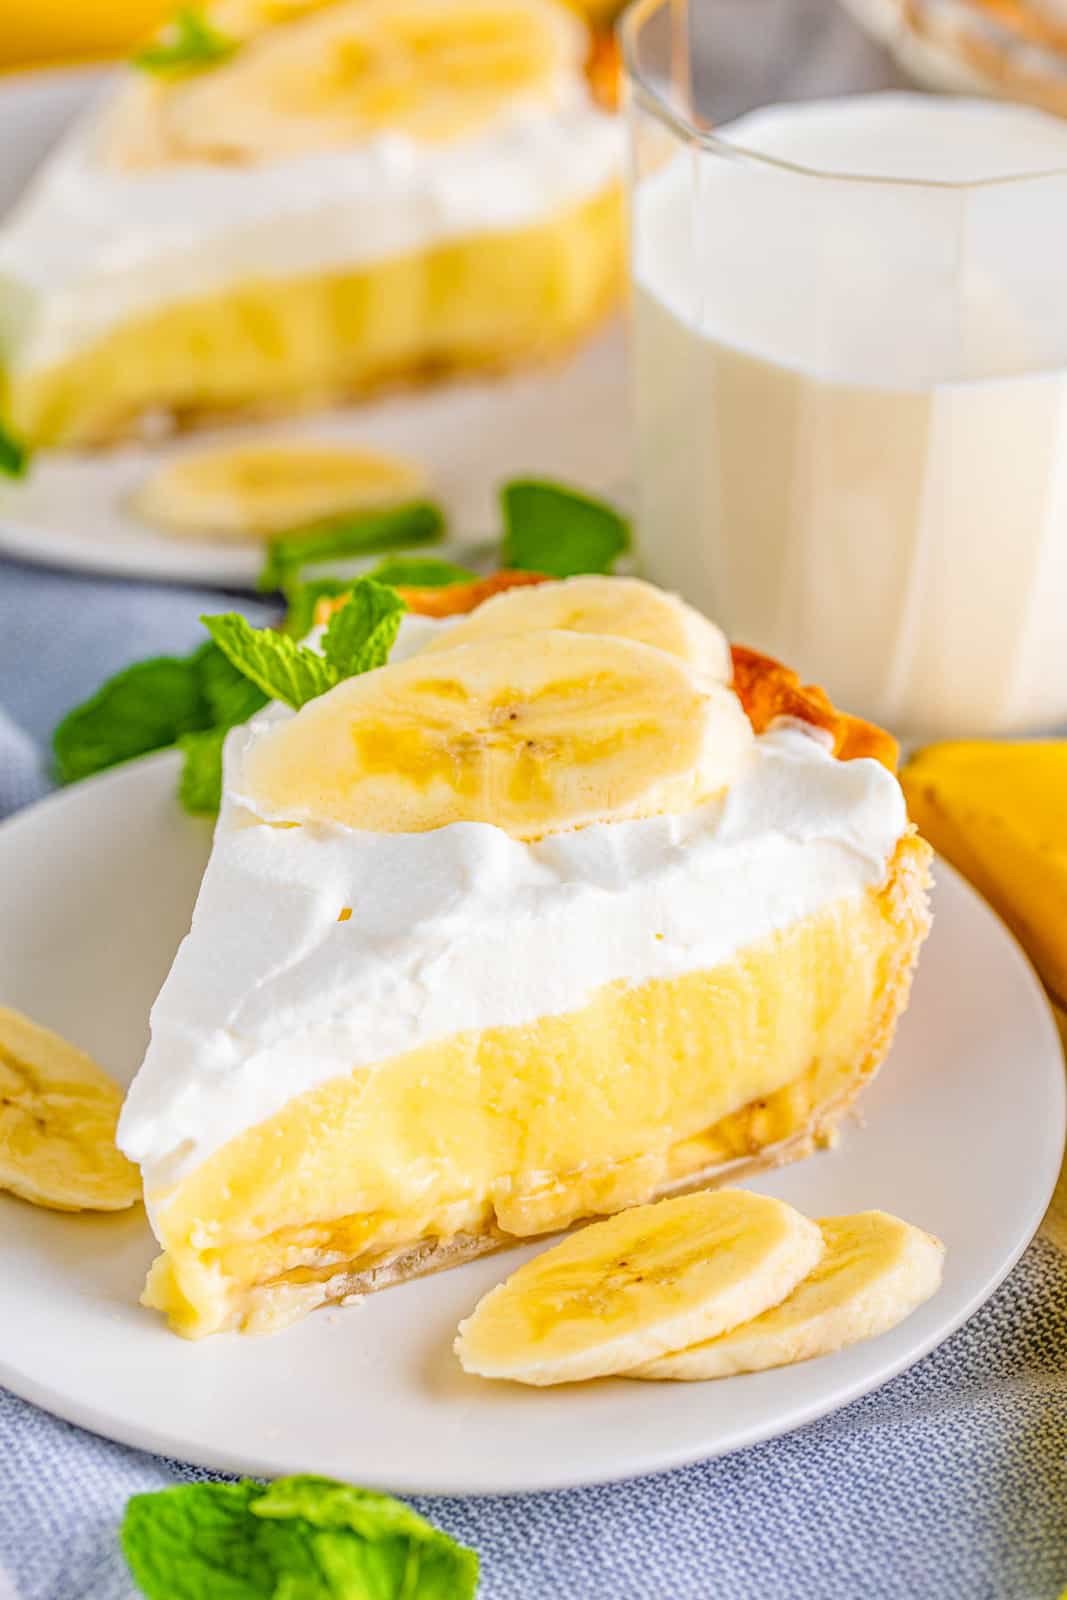 Slice of Banana Cream Pie garnished with banana slices and slices on plate.